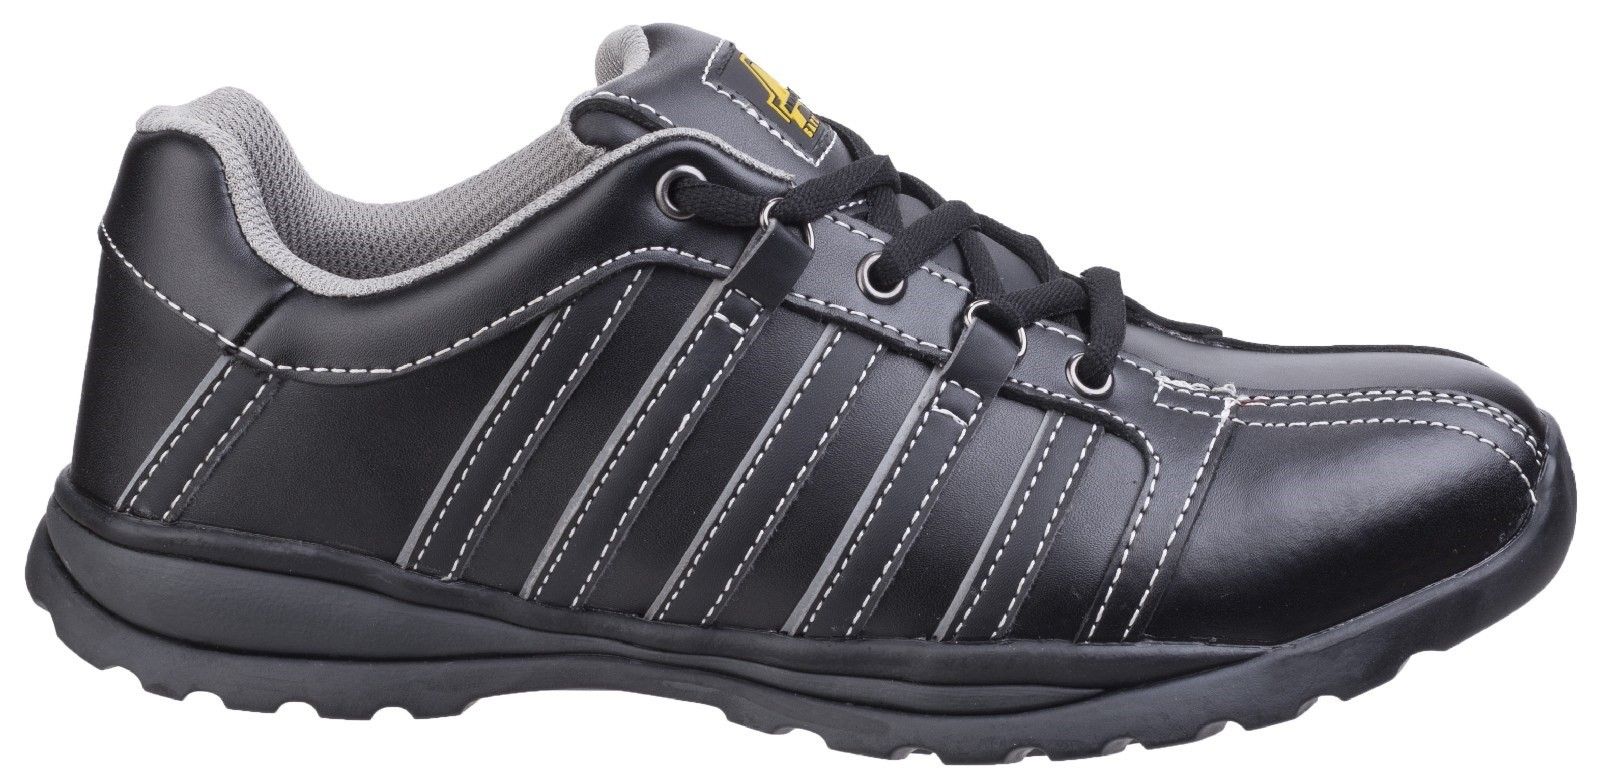 A light weight safety shoe with rubber sole to 300 degrees, heat resistance, SRC slip and anti-static penetration protection sole.Stylish safety trainer with steel toe cap and midsole protection. 
Black leather upper with smooth leather overlays and silver highlights. 
Unique lace up front with alternating eyelets and D-Ring lace holds. 
Comfortably lined with padded textile mesh lining. 
Removable EVA insole.